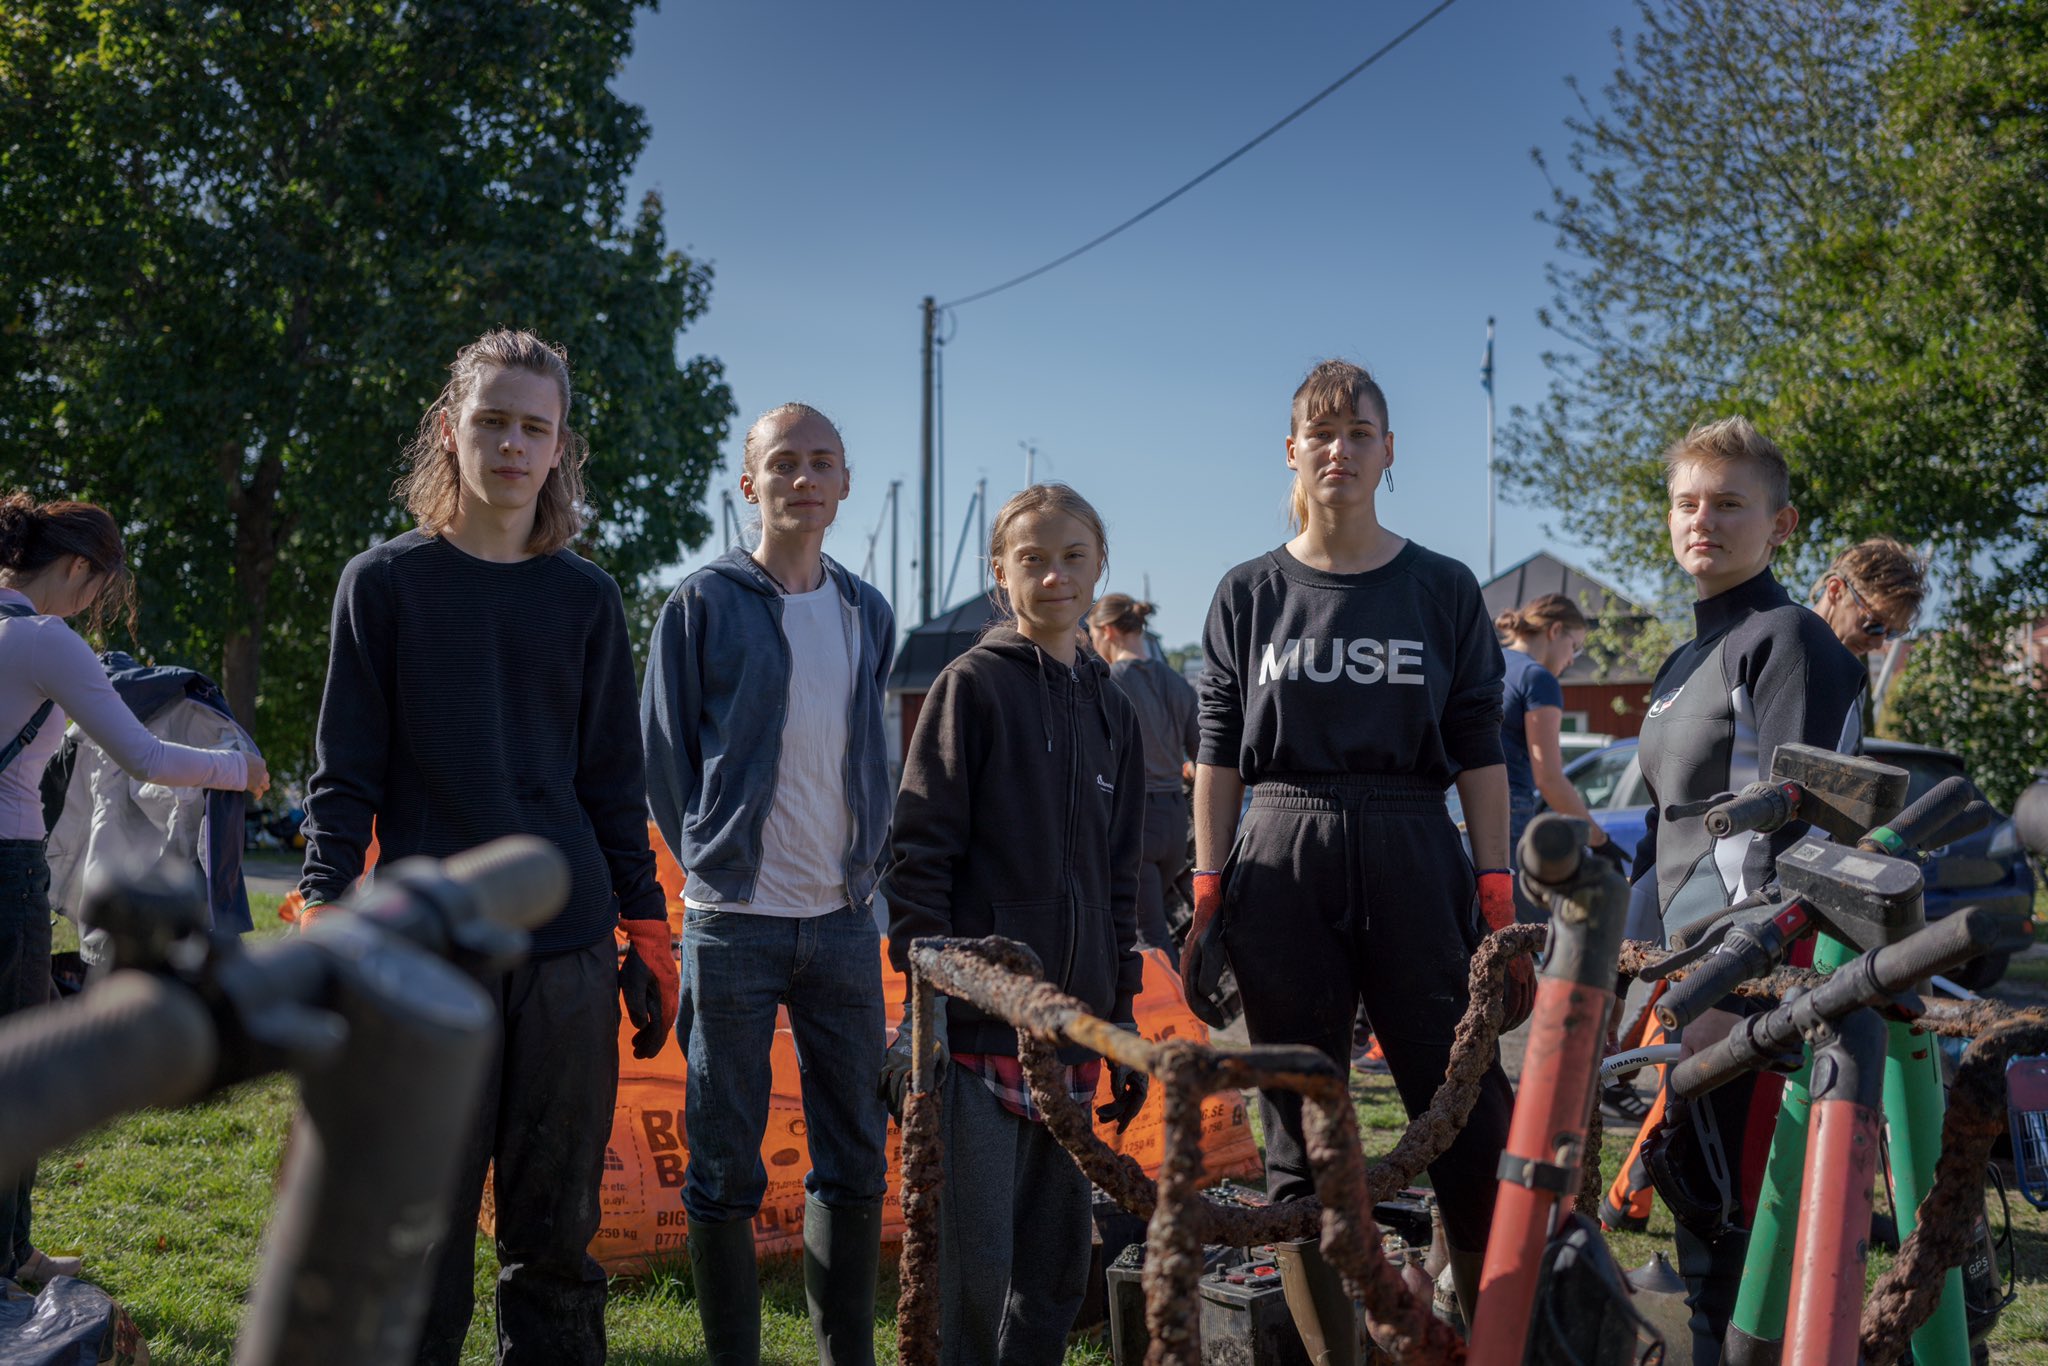 Greta Thunberg on Twitter: "Today on #worldcleanupday I - along with other activists from @FFF_Sweden - joined Rena Mälaren to clean up lake Mälaren. We scored great number electric scooters,